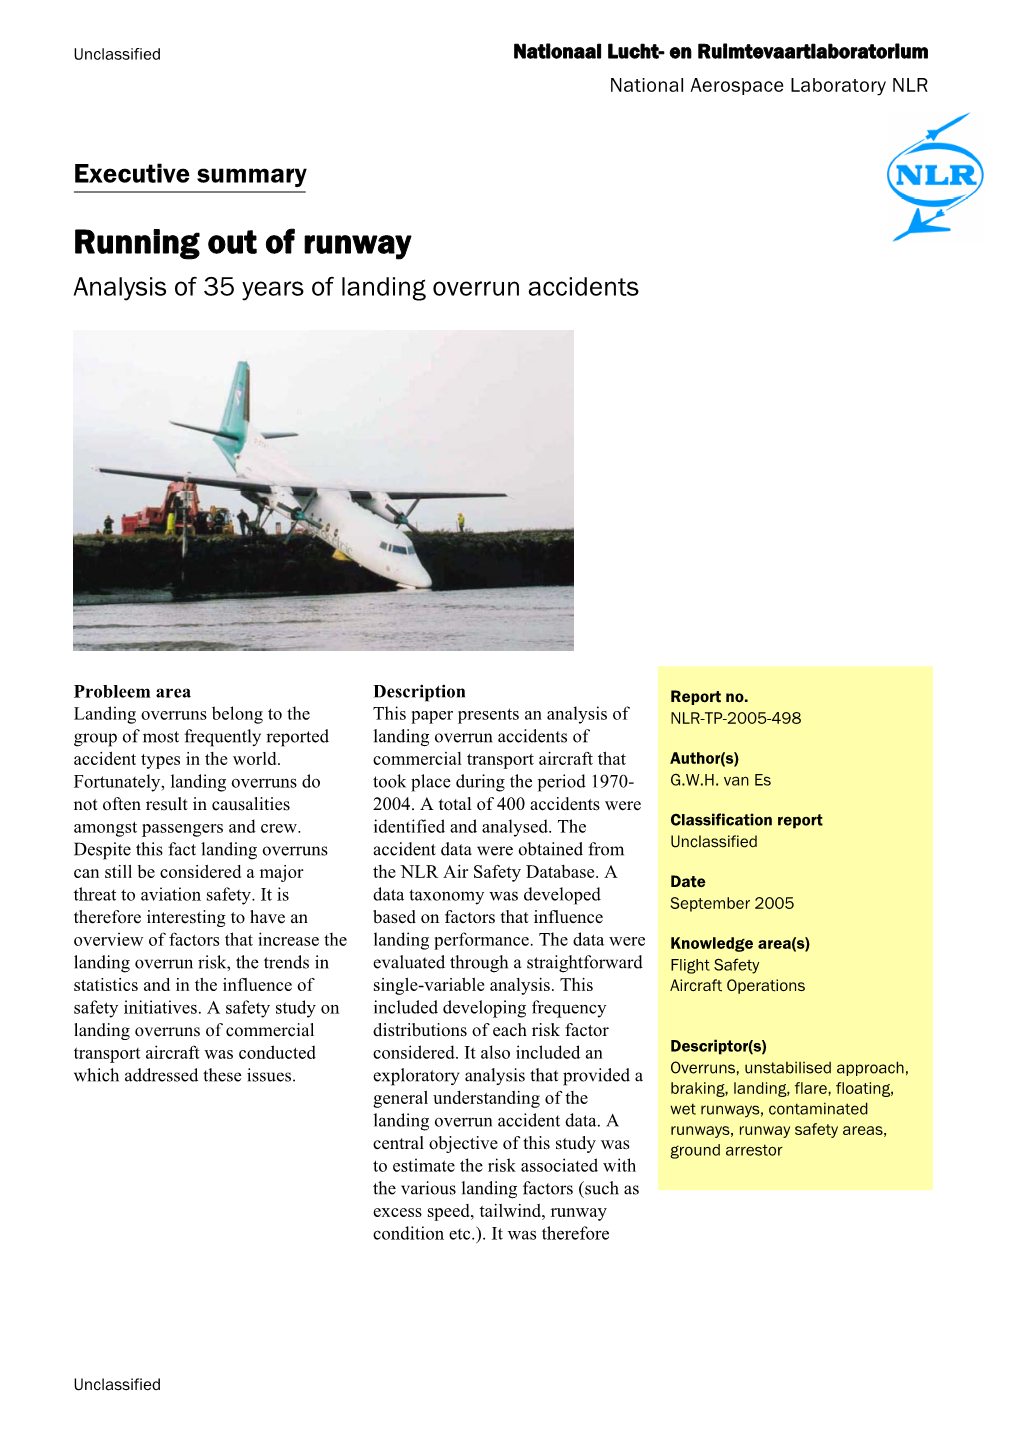 Running out of Runway Analysis of 35 Years of Landing Overrun Accidents